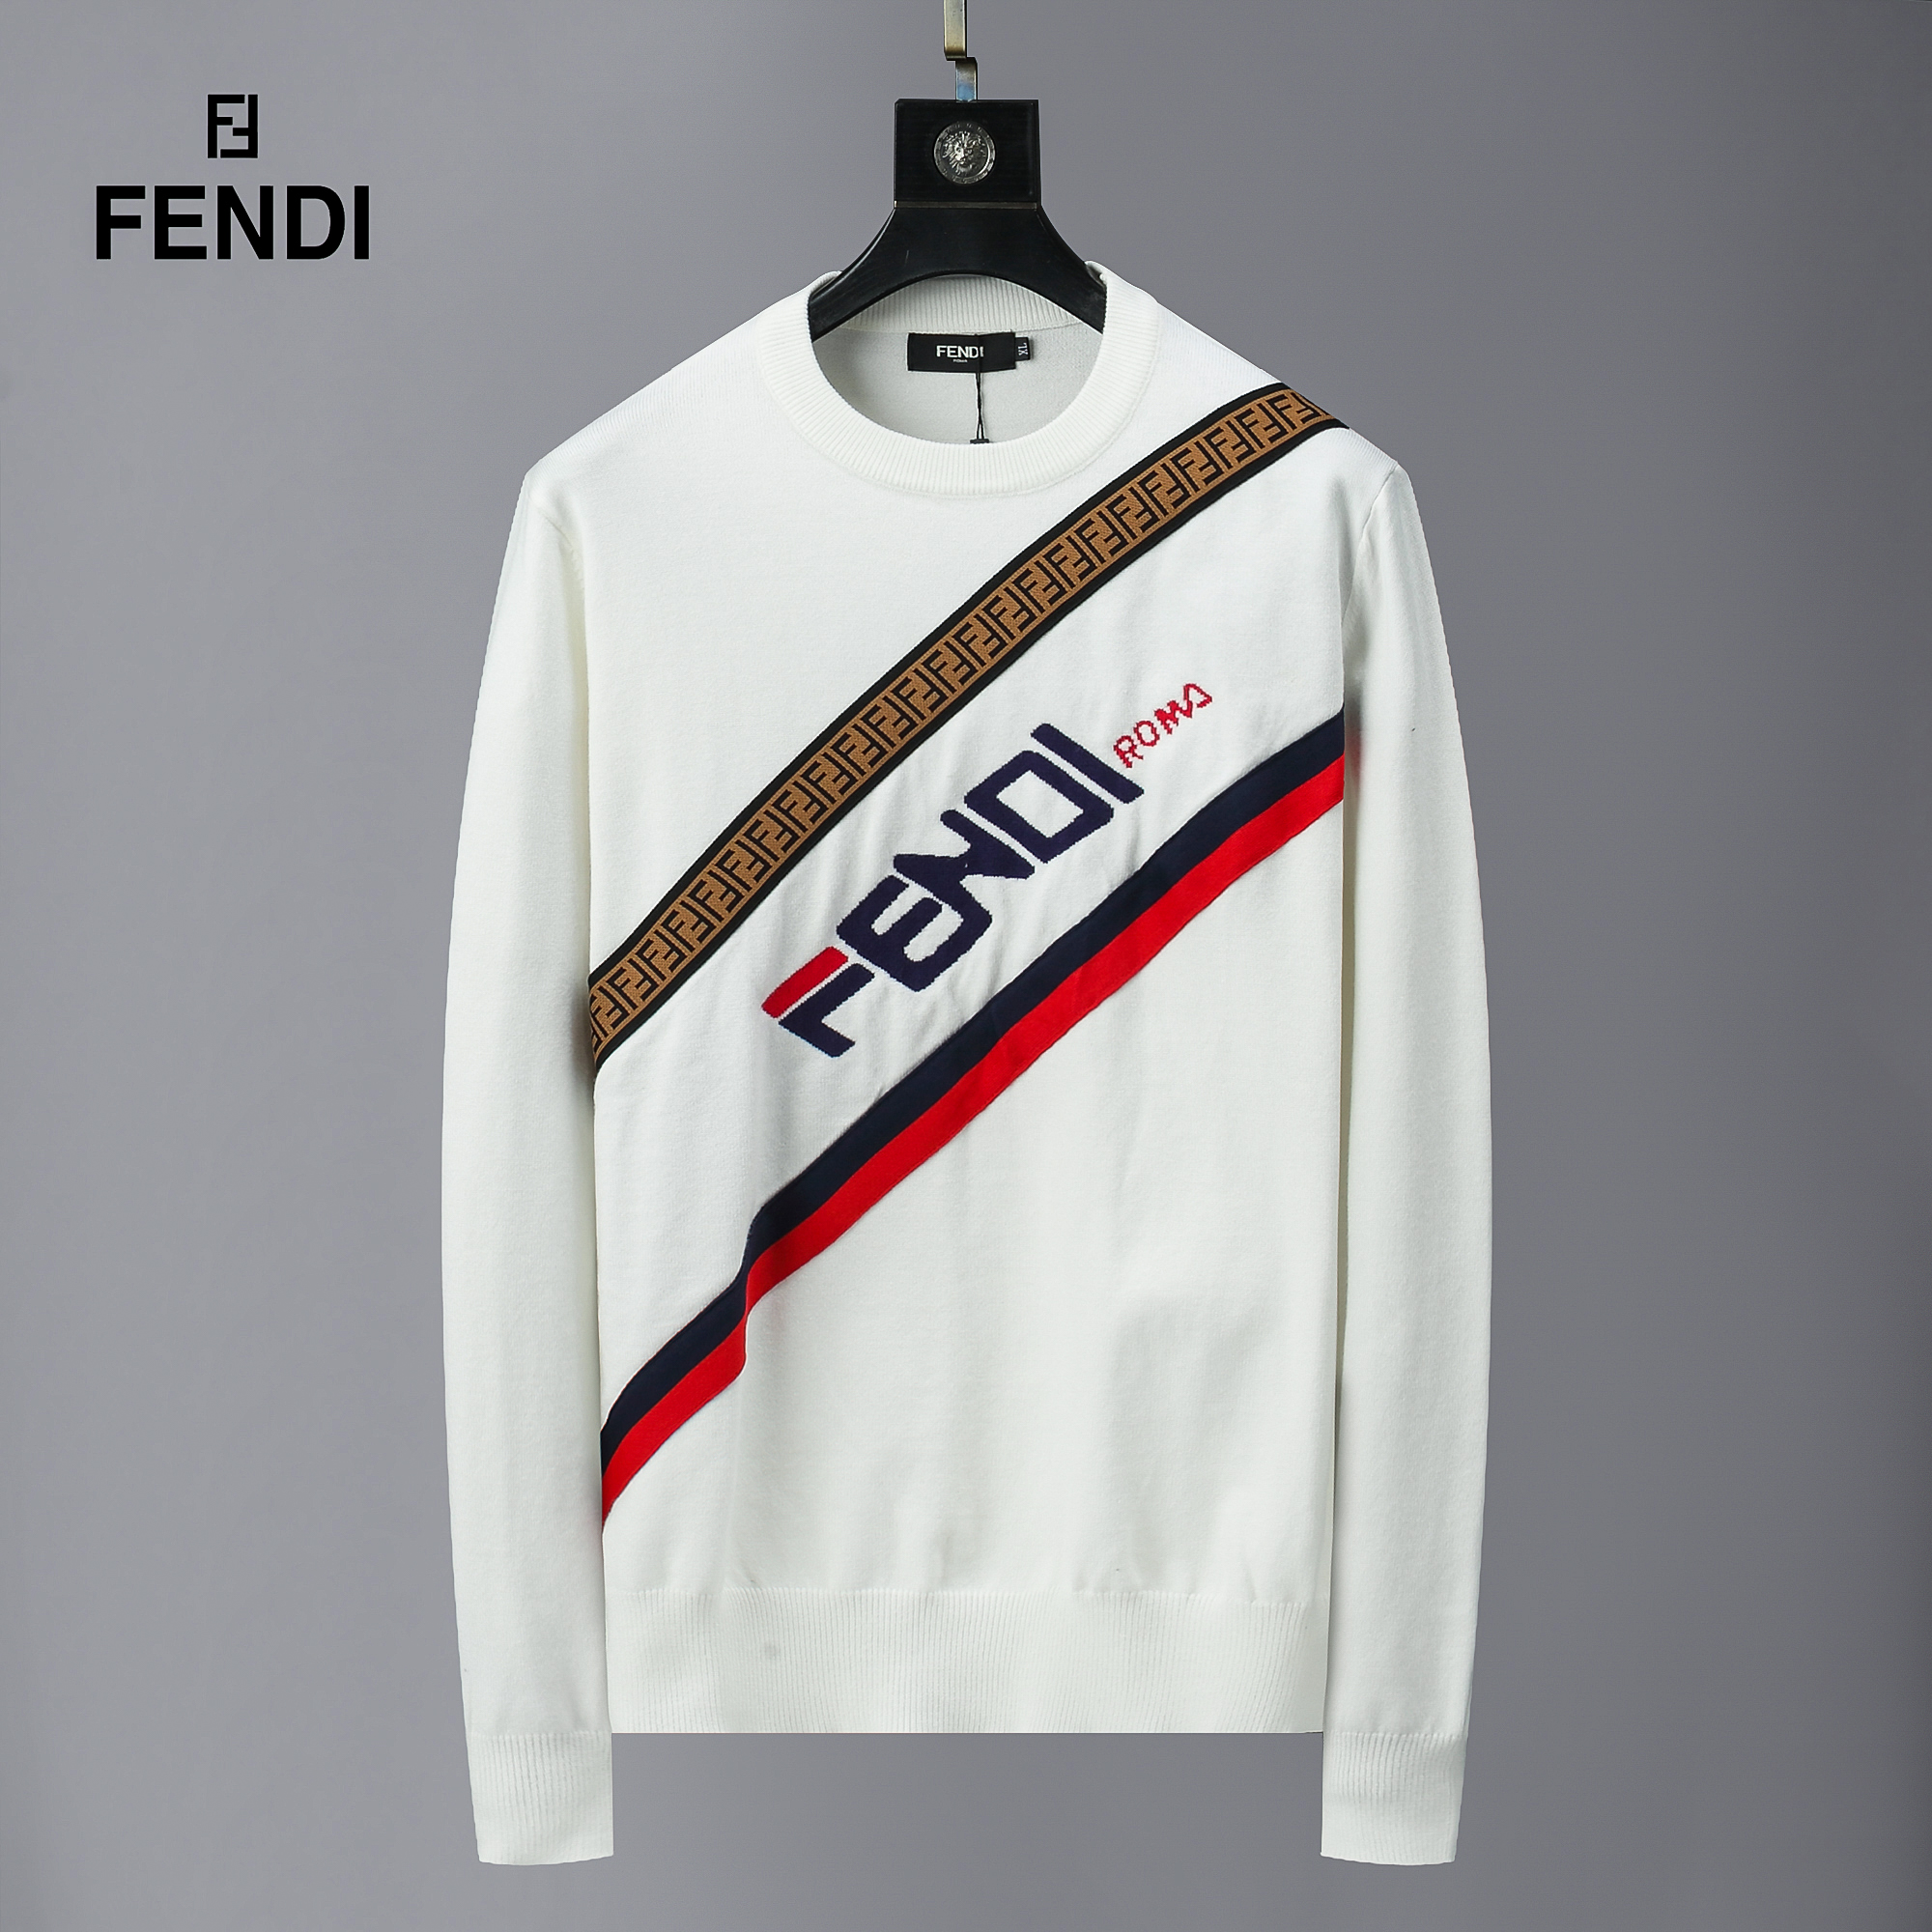 Fendi Round Neck Sweater For Men in 261355, cheap Fendi Sweaters, only $48!